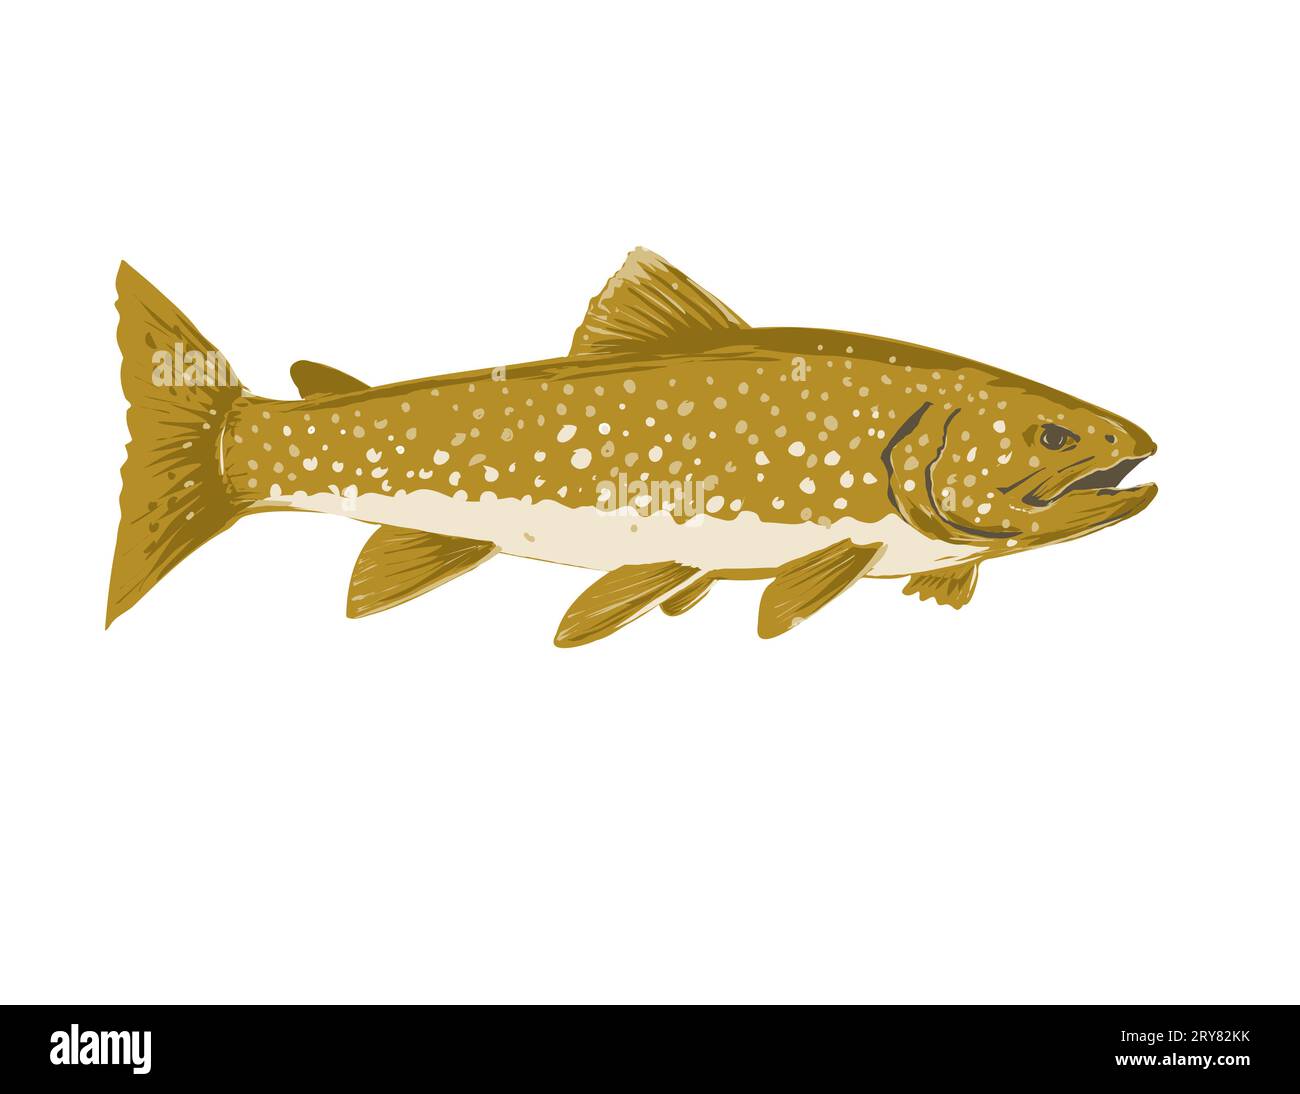 WPA poster art of a lake trout, Salvelinus namaycush, mackinaw, namaycush or lake char viewed from side done in works project administration style or Stock Photo